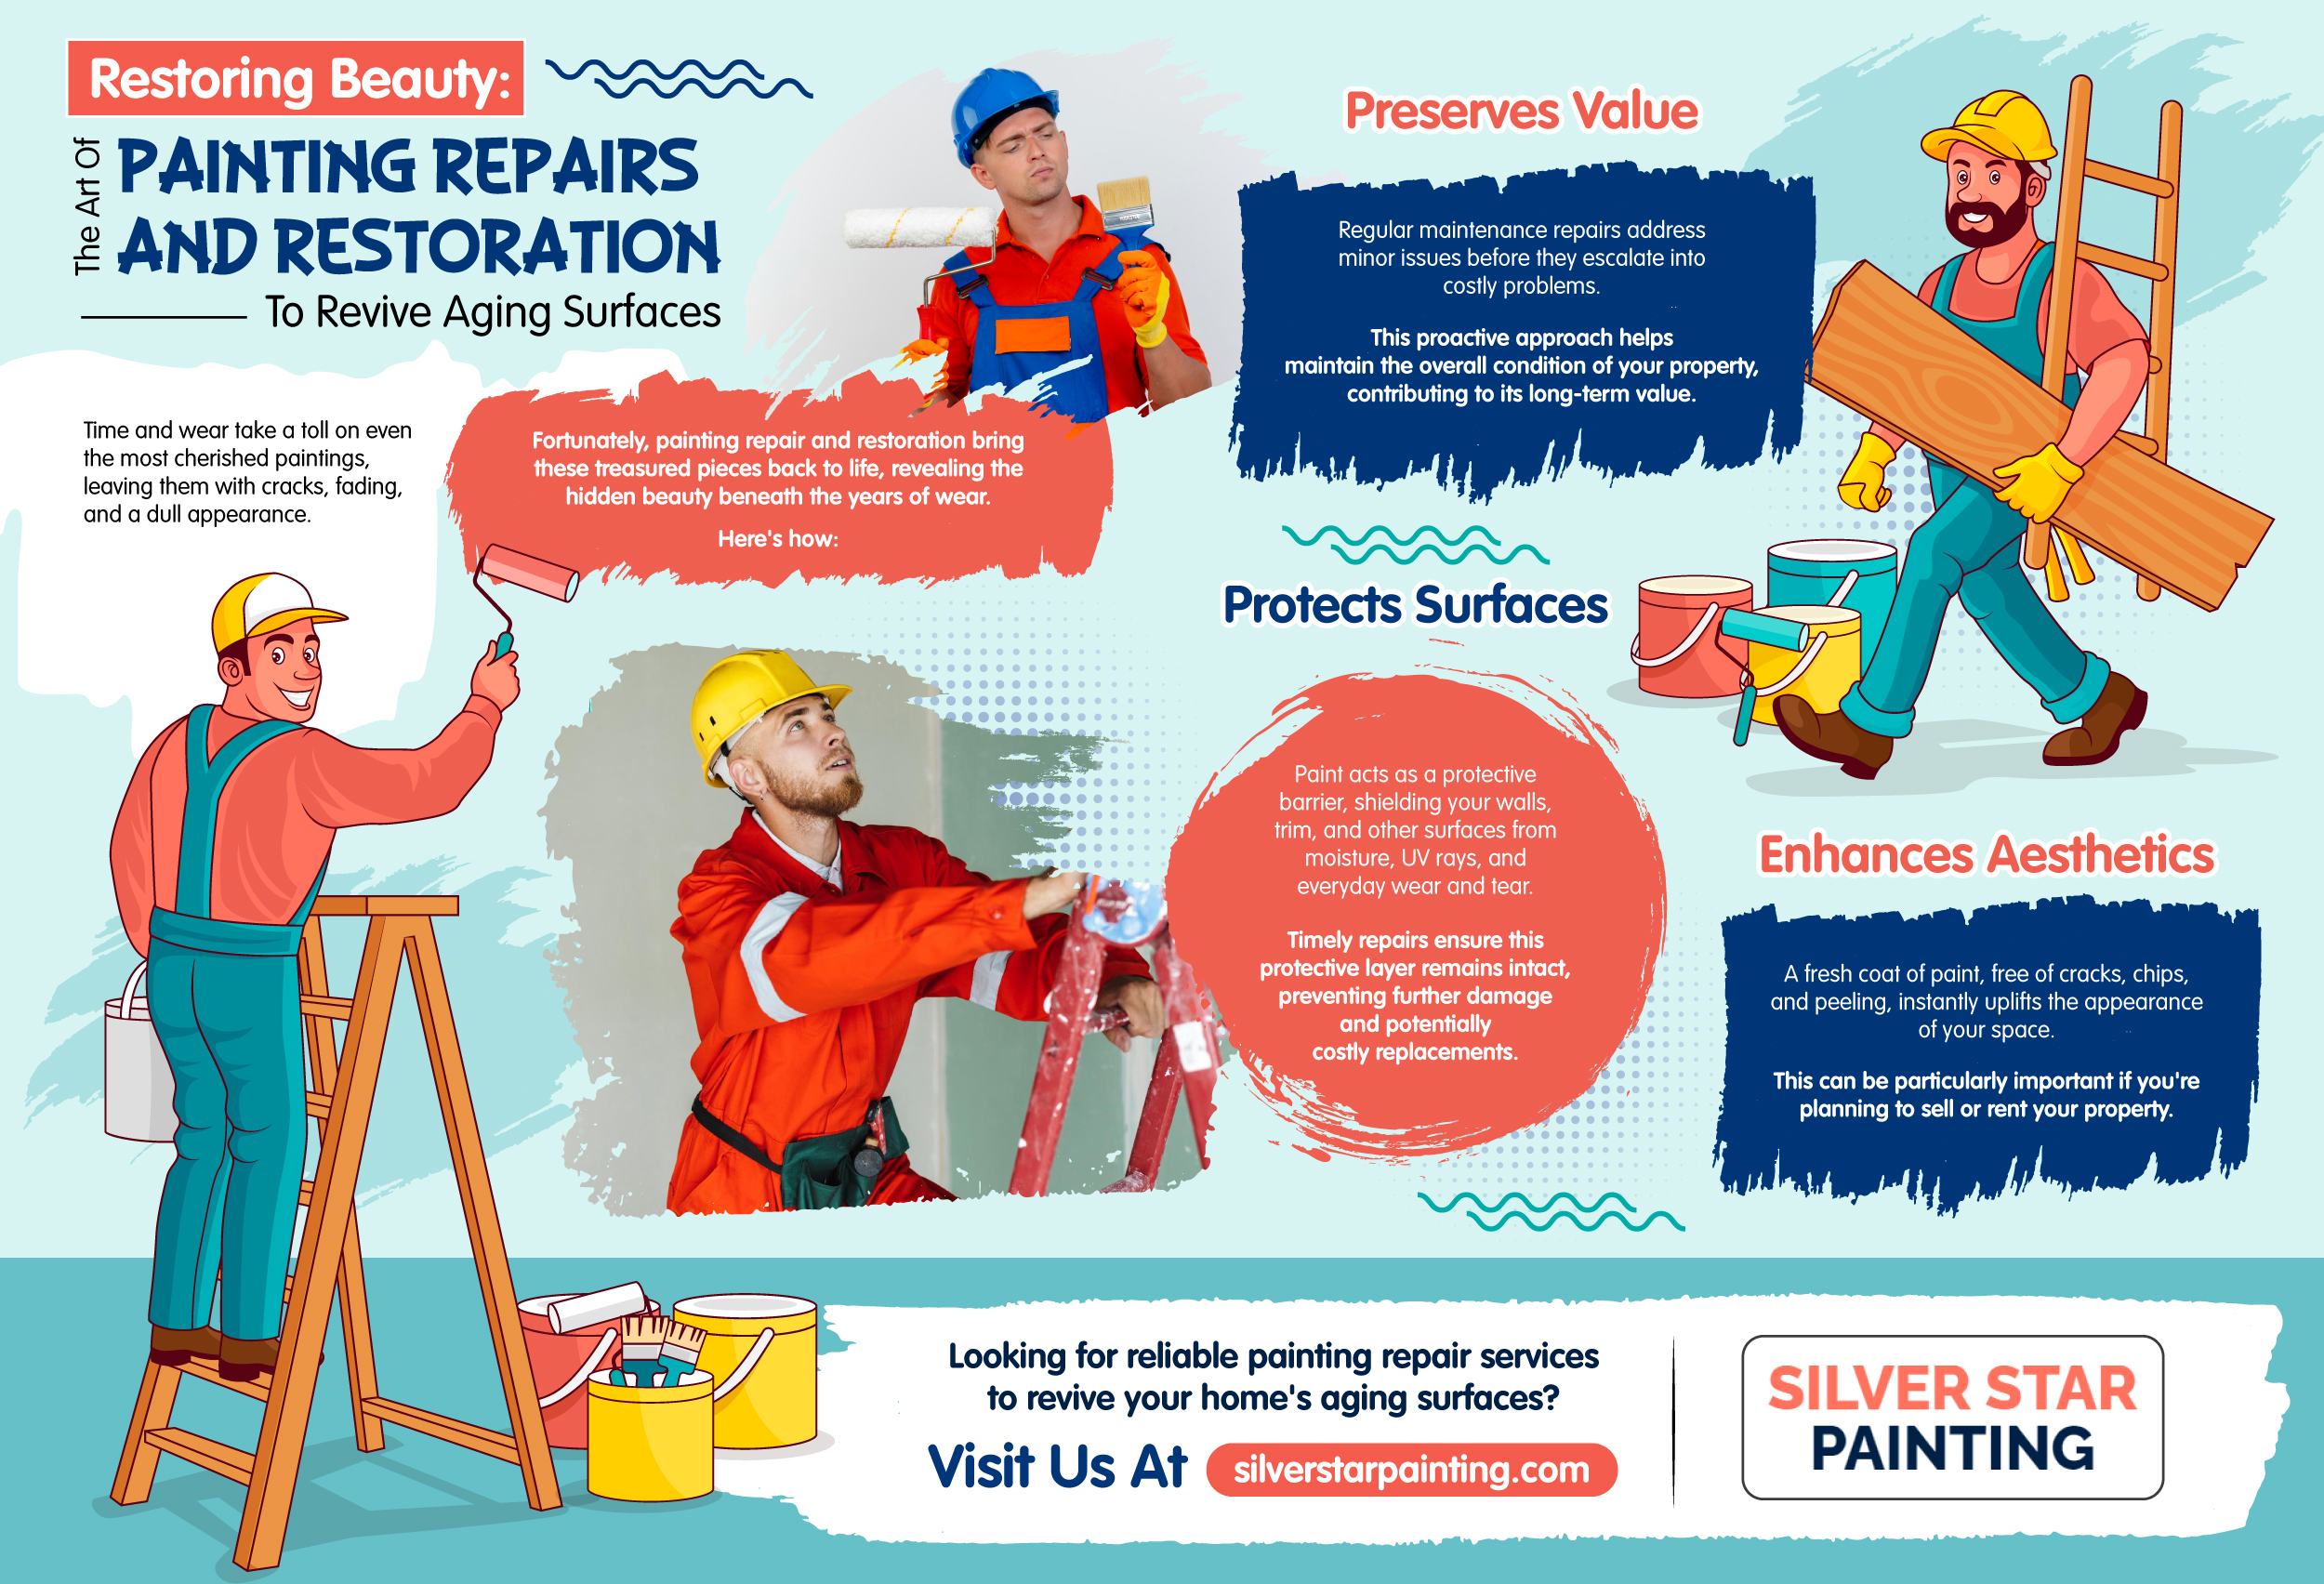 Restoring Beauty: The Art of Painting Repairs and Restoration for Revitalizing Aging Surfaces - An Infographic